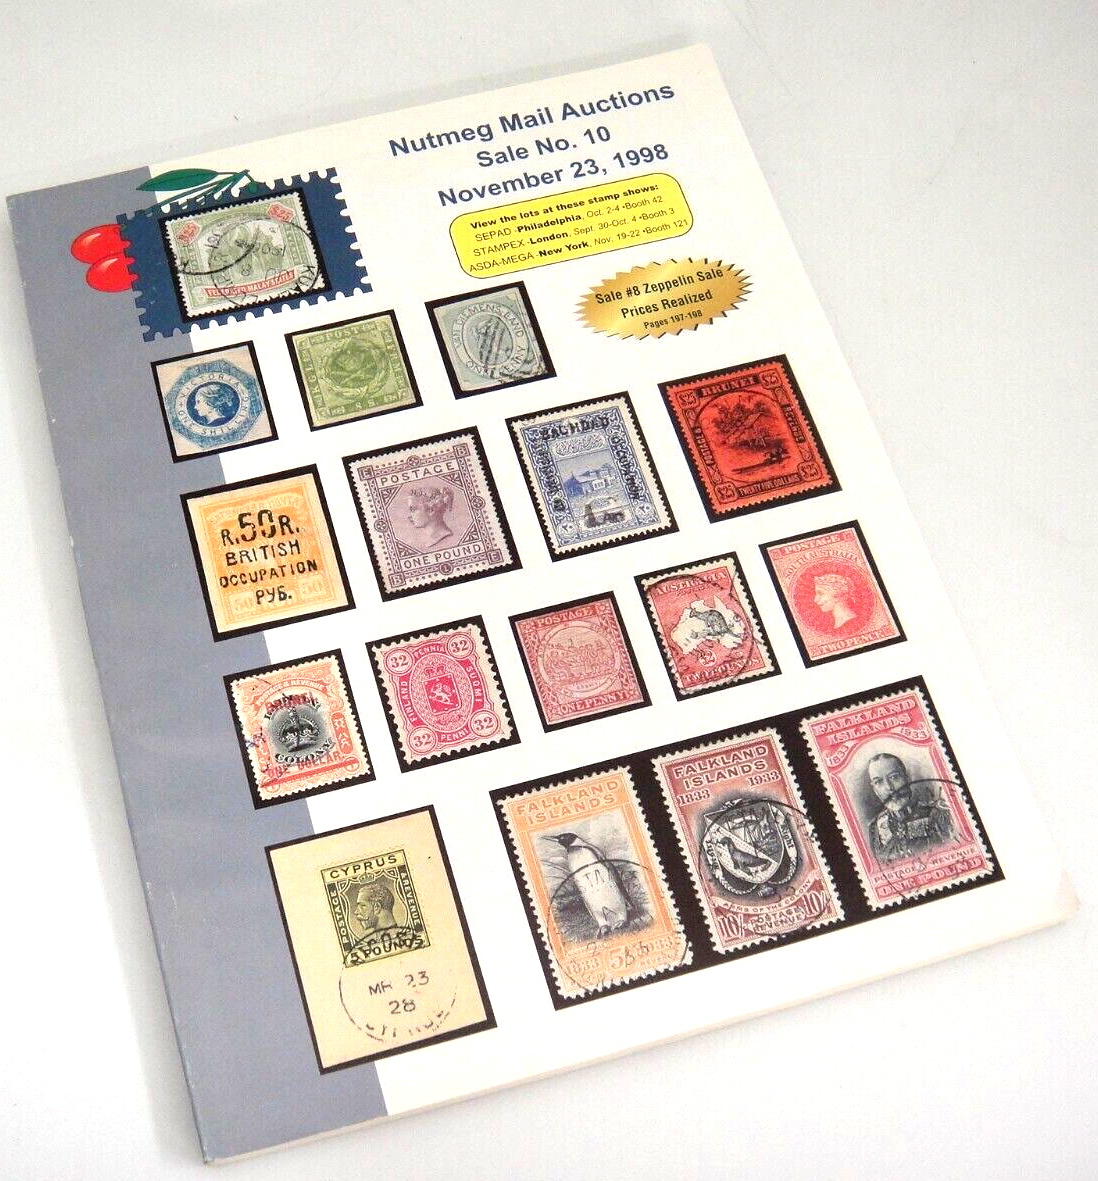 Primary image for Nutmeg Stamp Auction Catalog 1998 British Commonwealth and Worldwide